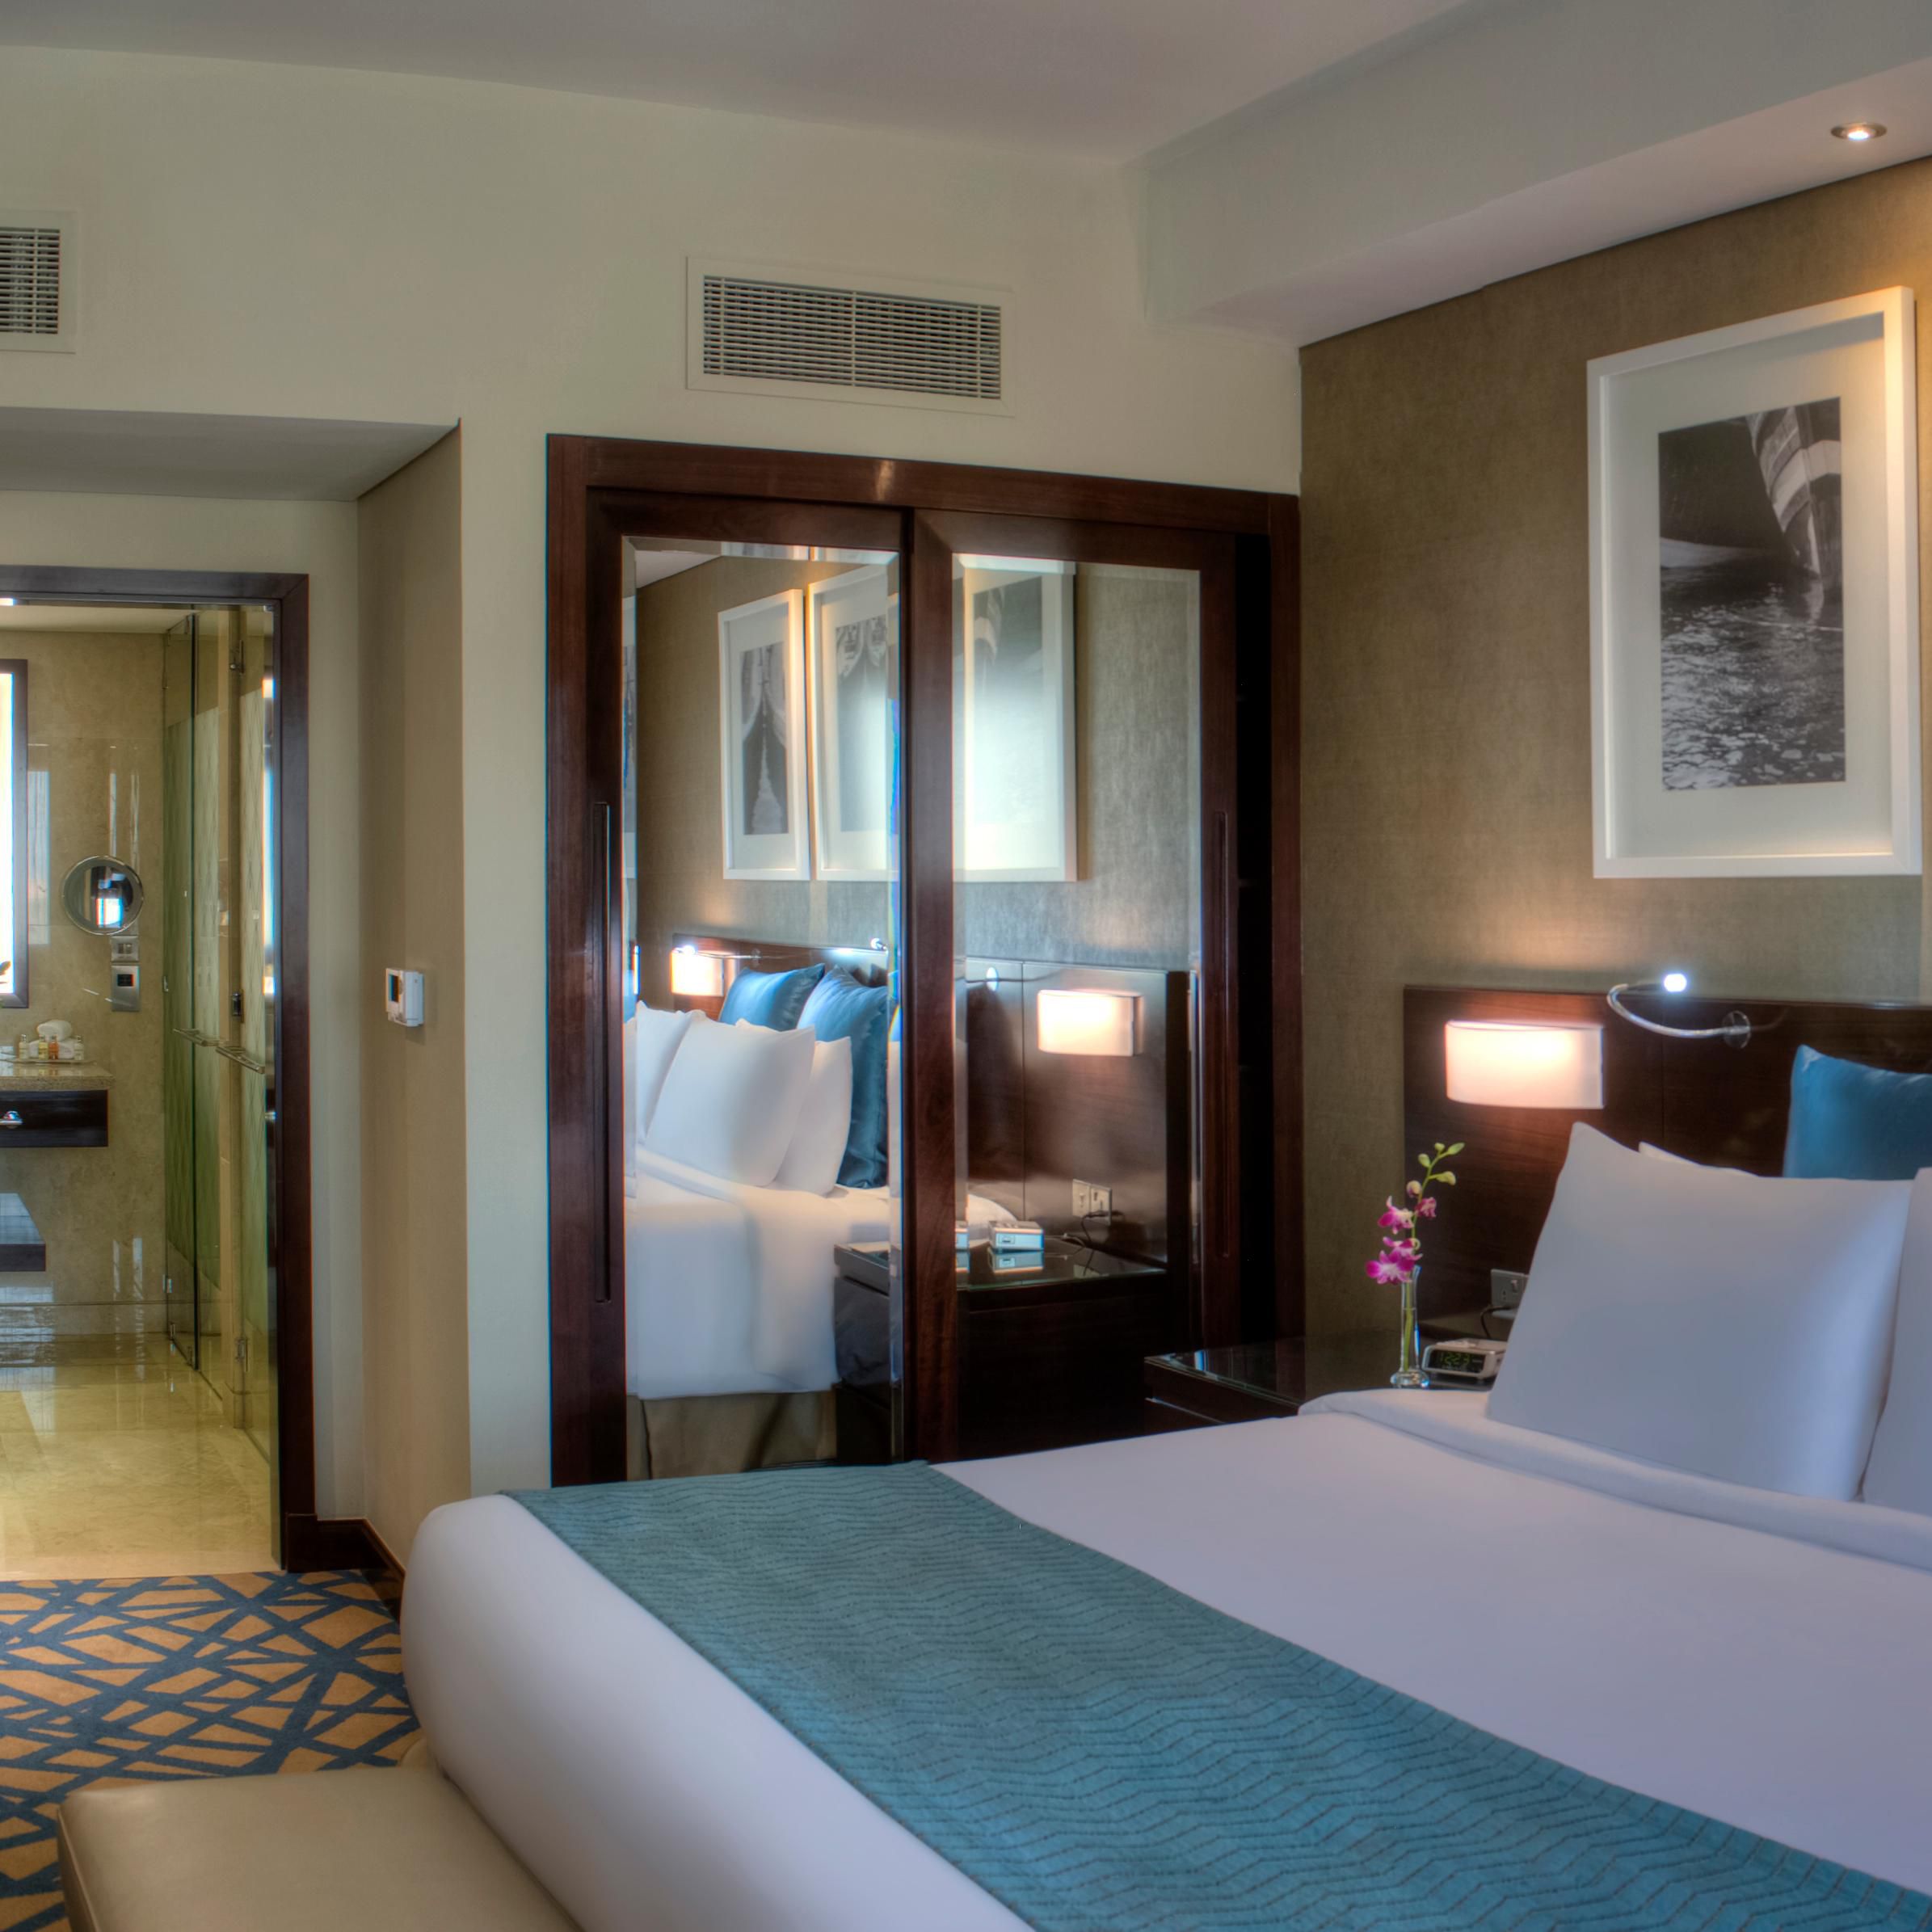 Executive Club Room offer you the chance to both work and relax